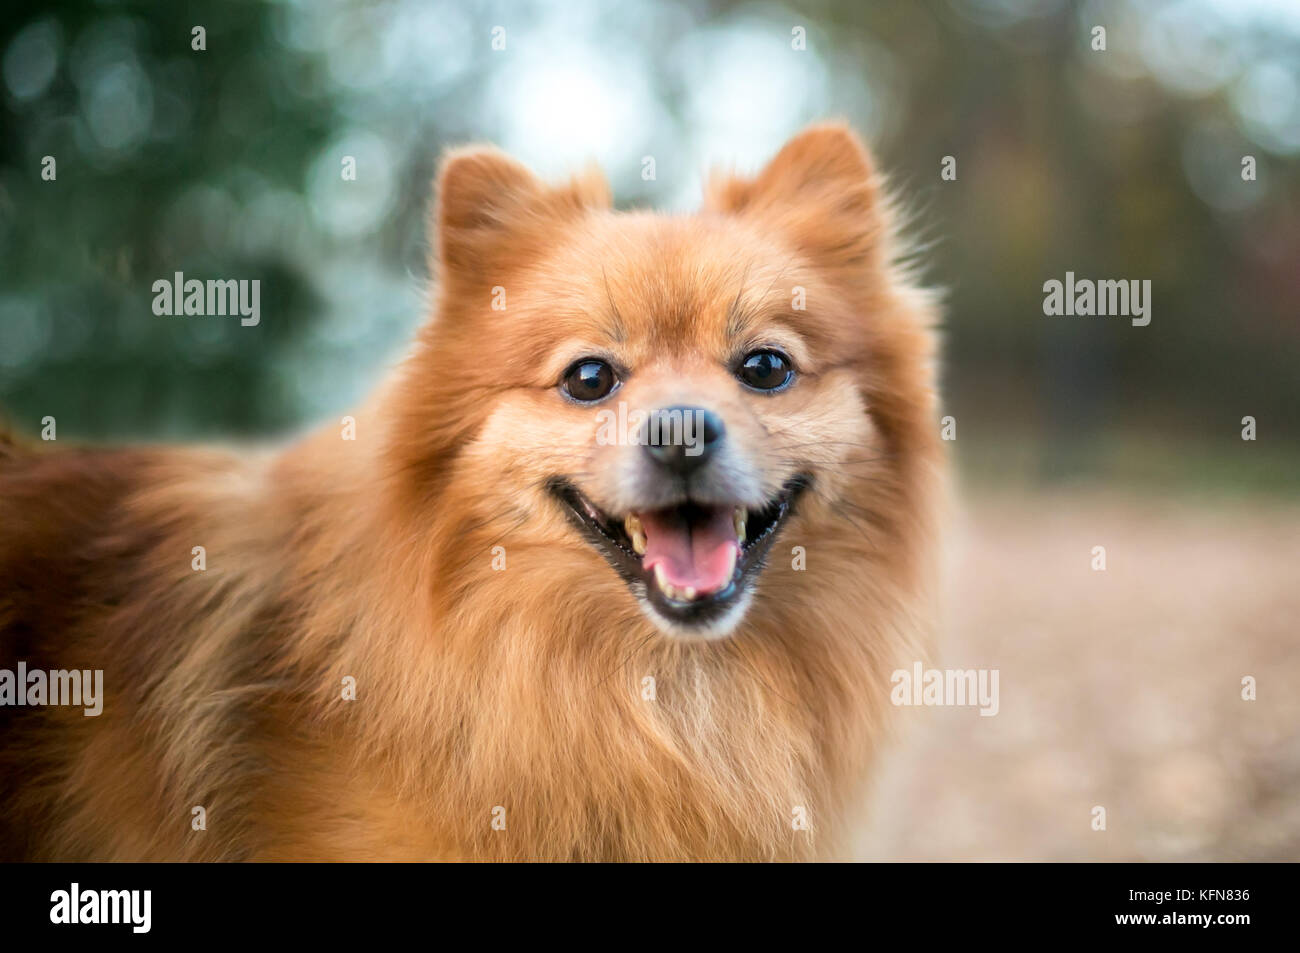 A red Pomeranian dog with a happy expression Stock Photo